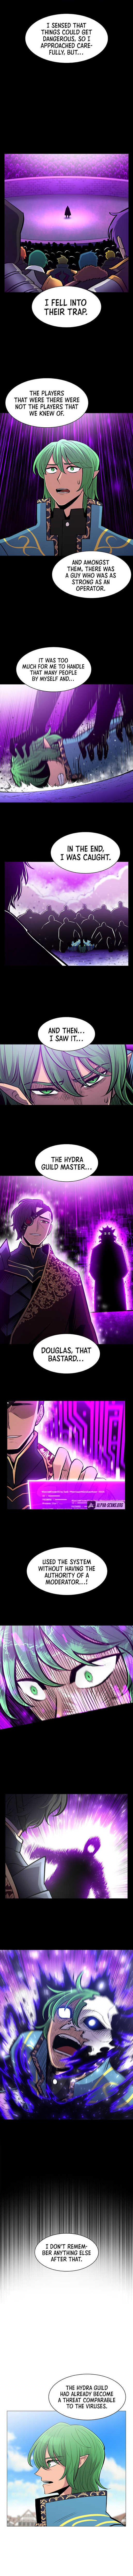 Updater - Chapter 74 Page 5